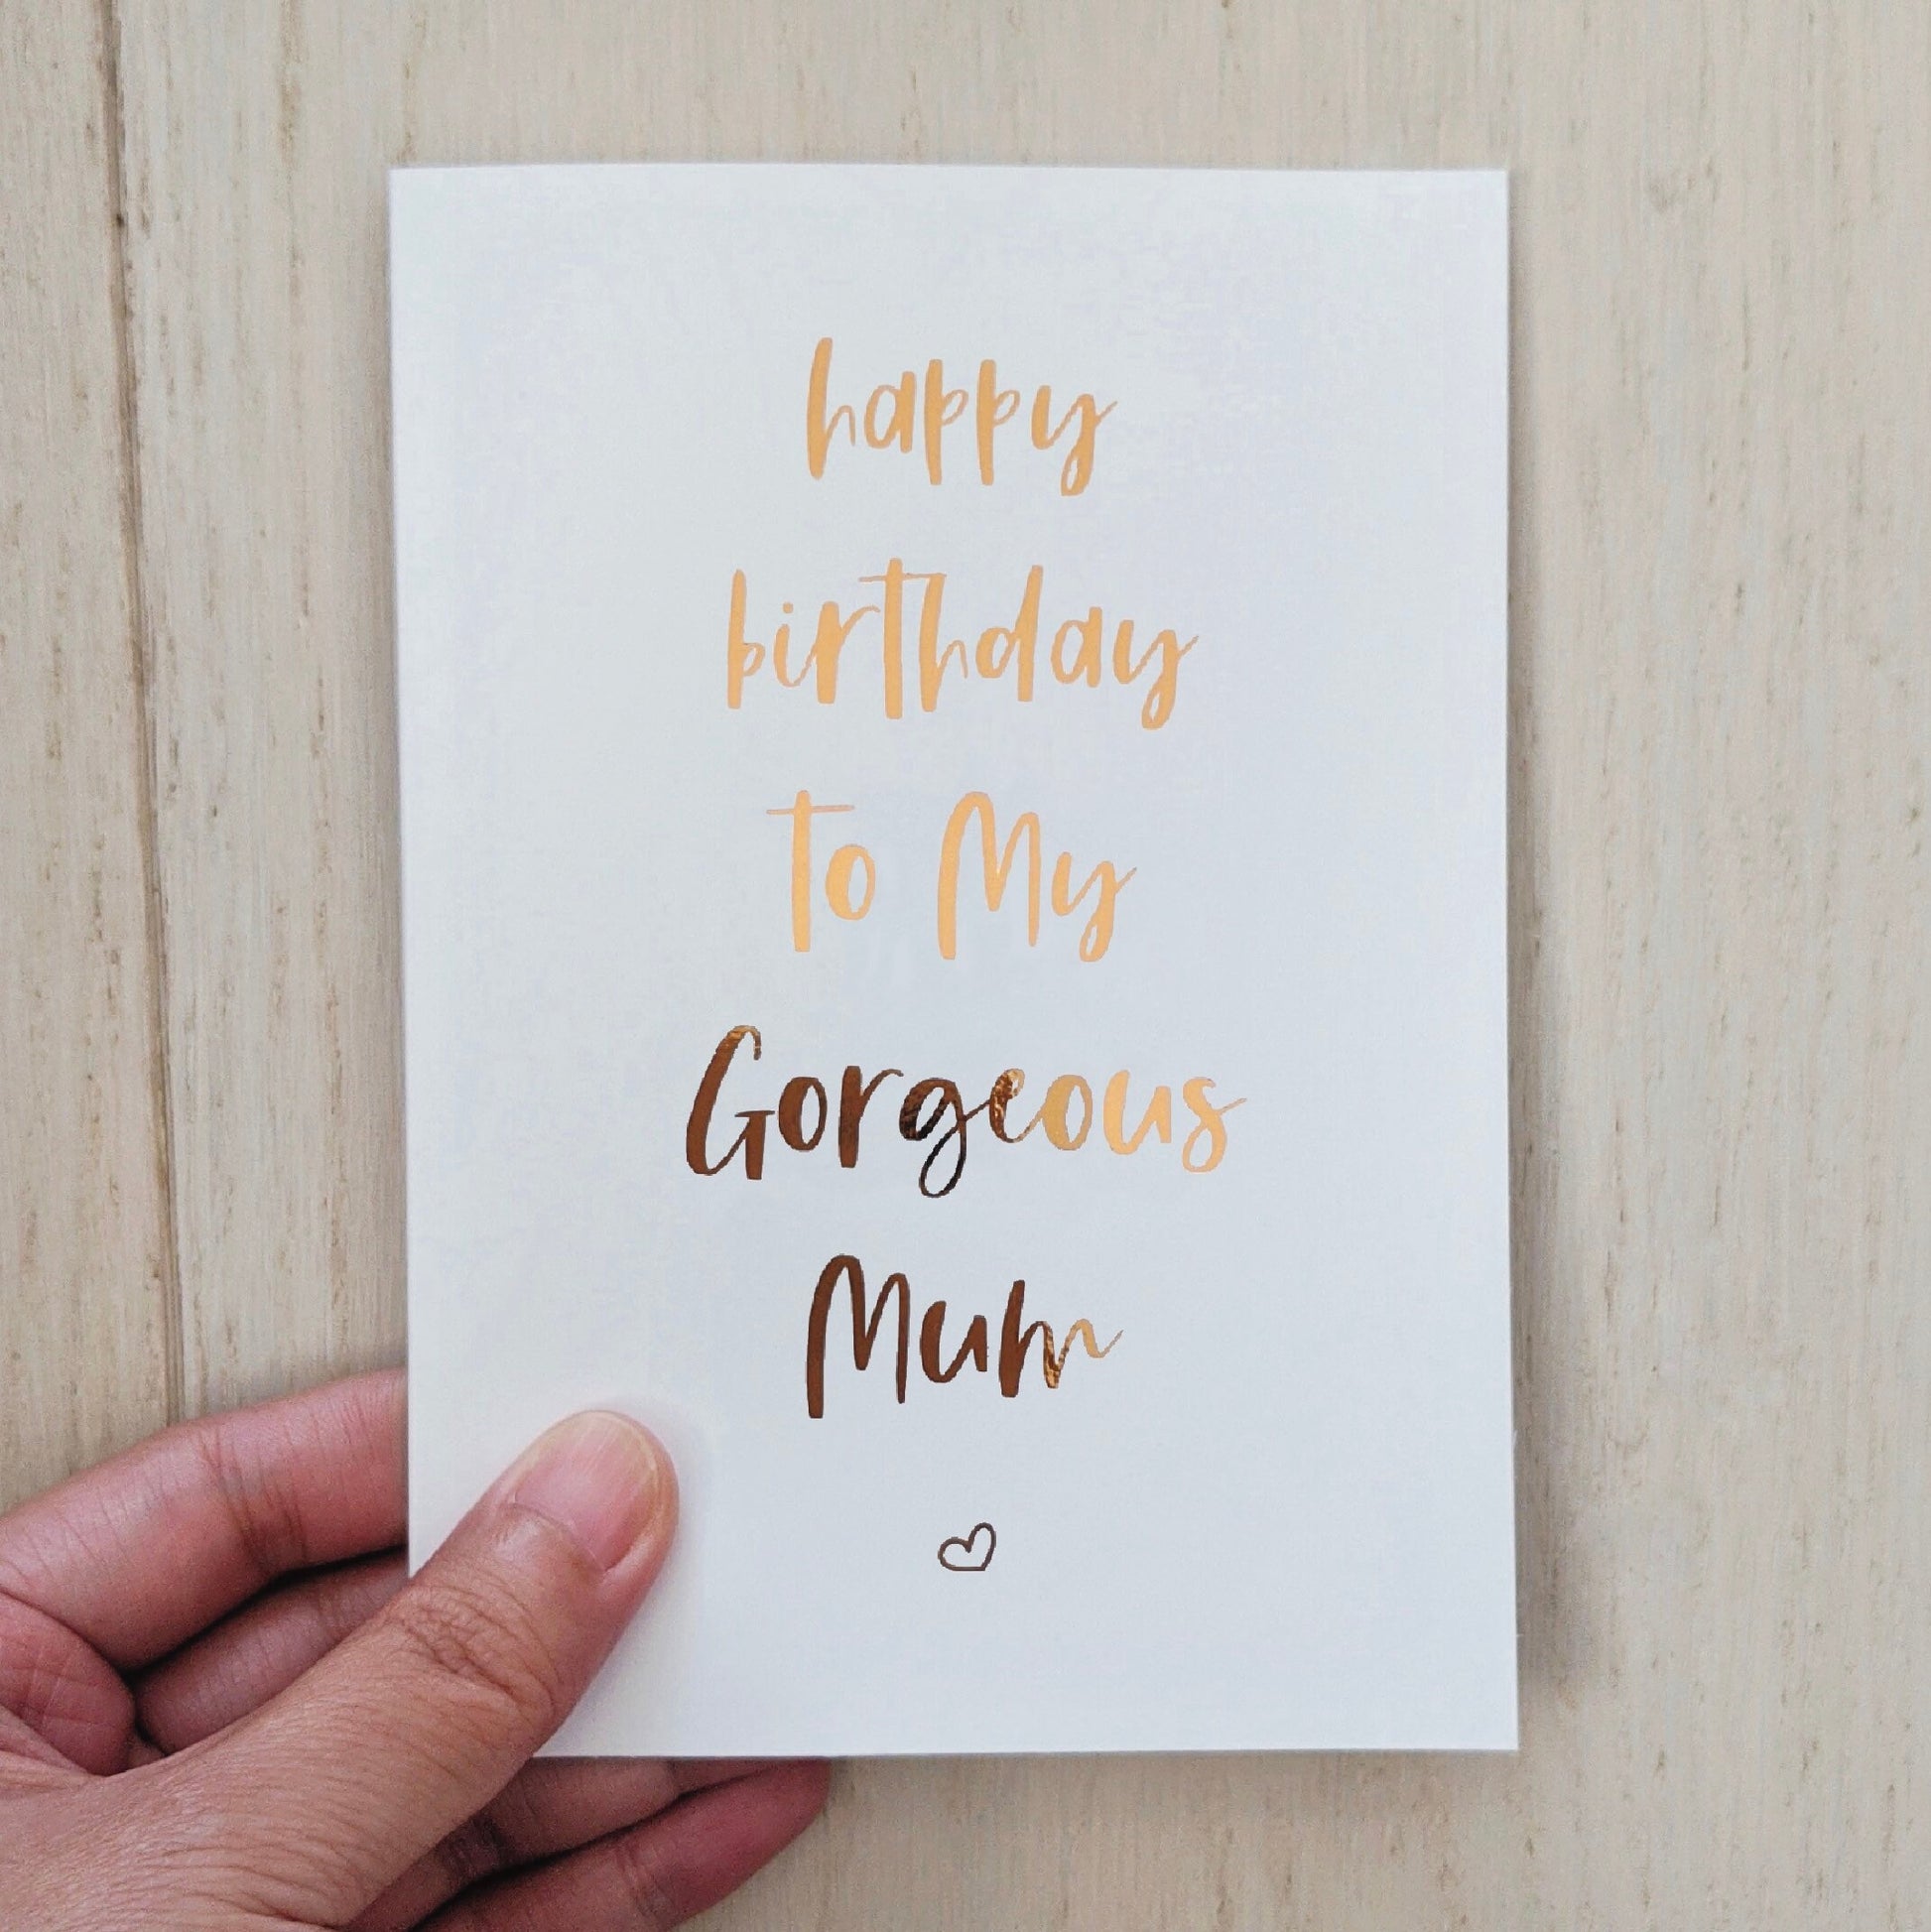 Greeting card with foiled lettering of "happy birthday to My Gorgeous Mum"